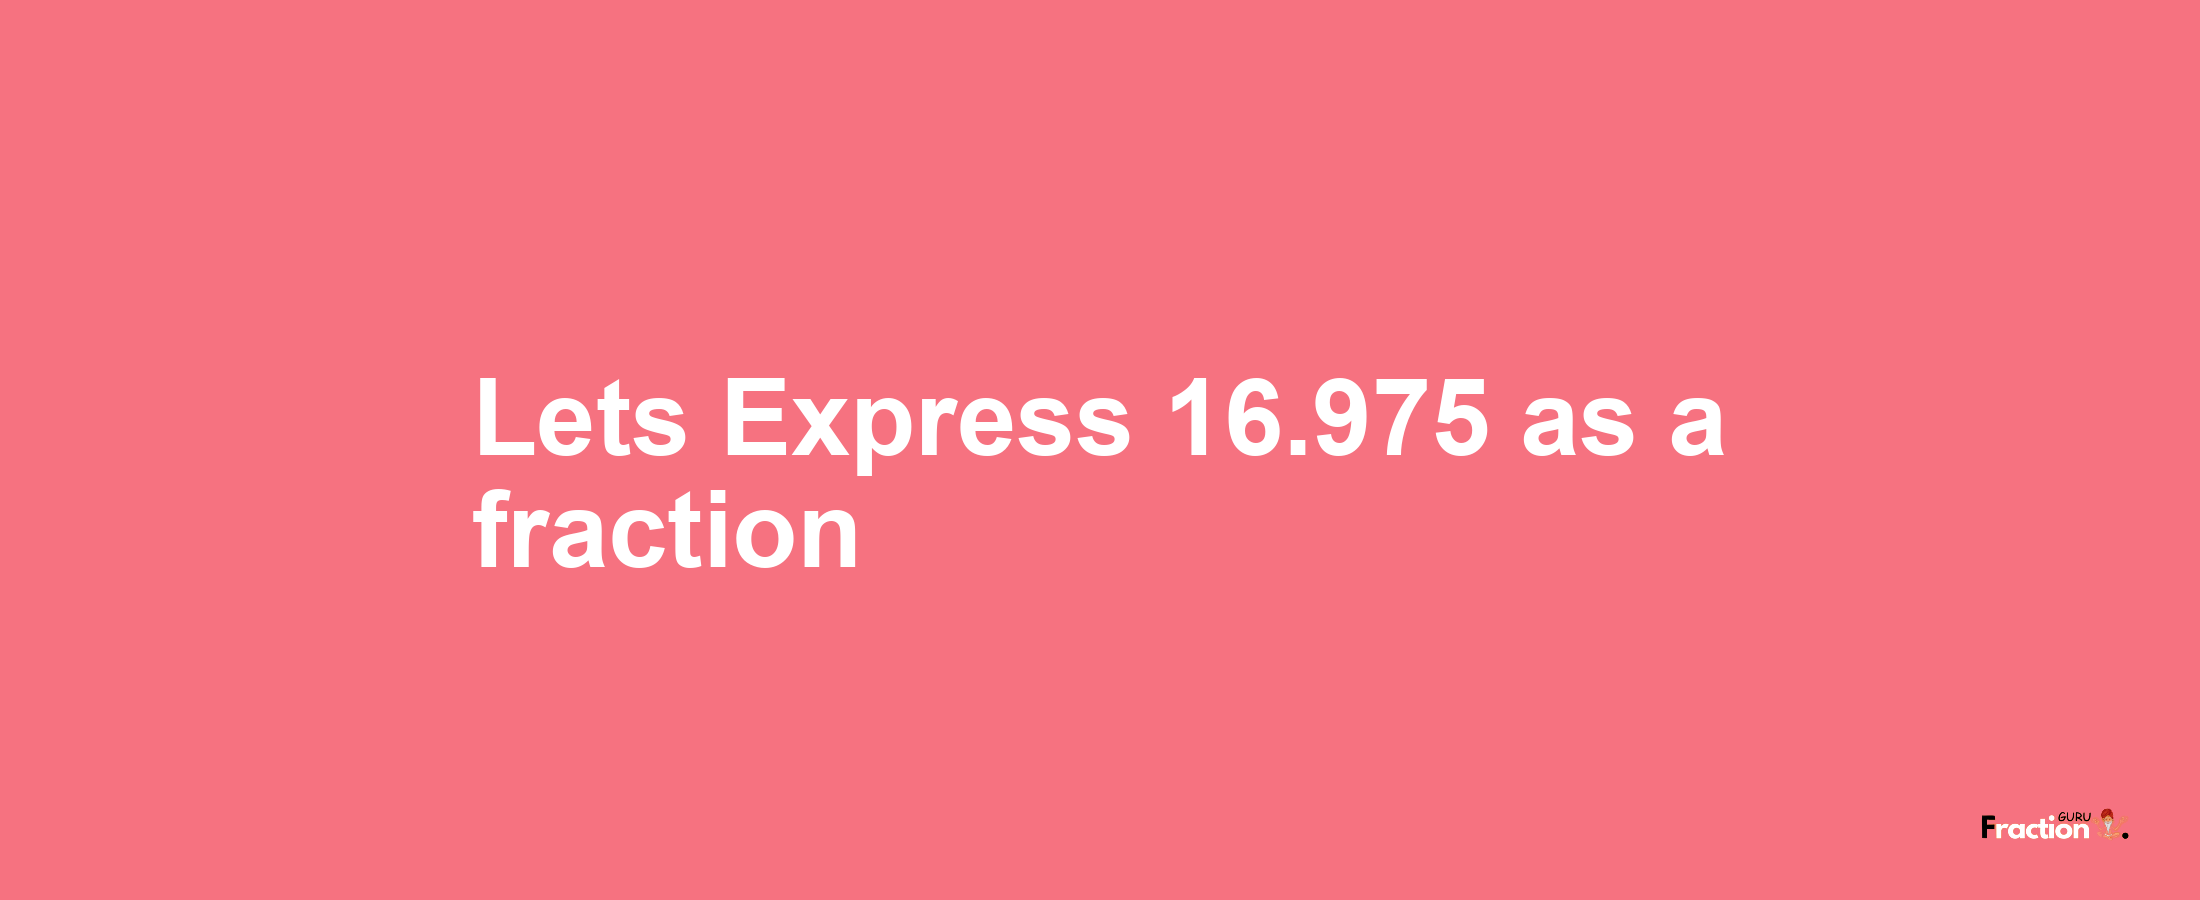 Lets Express 16.975 as afraction